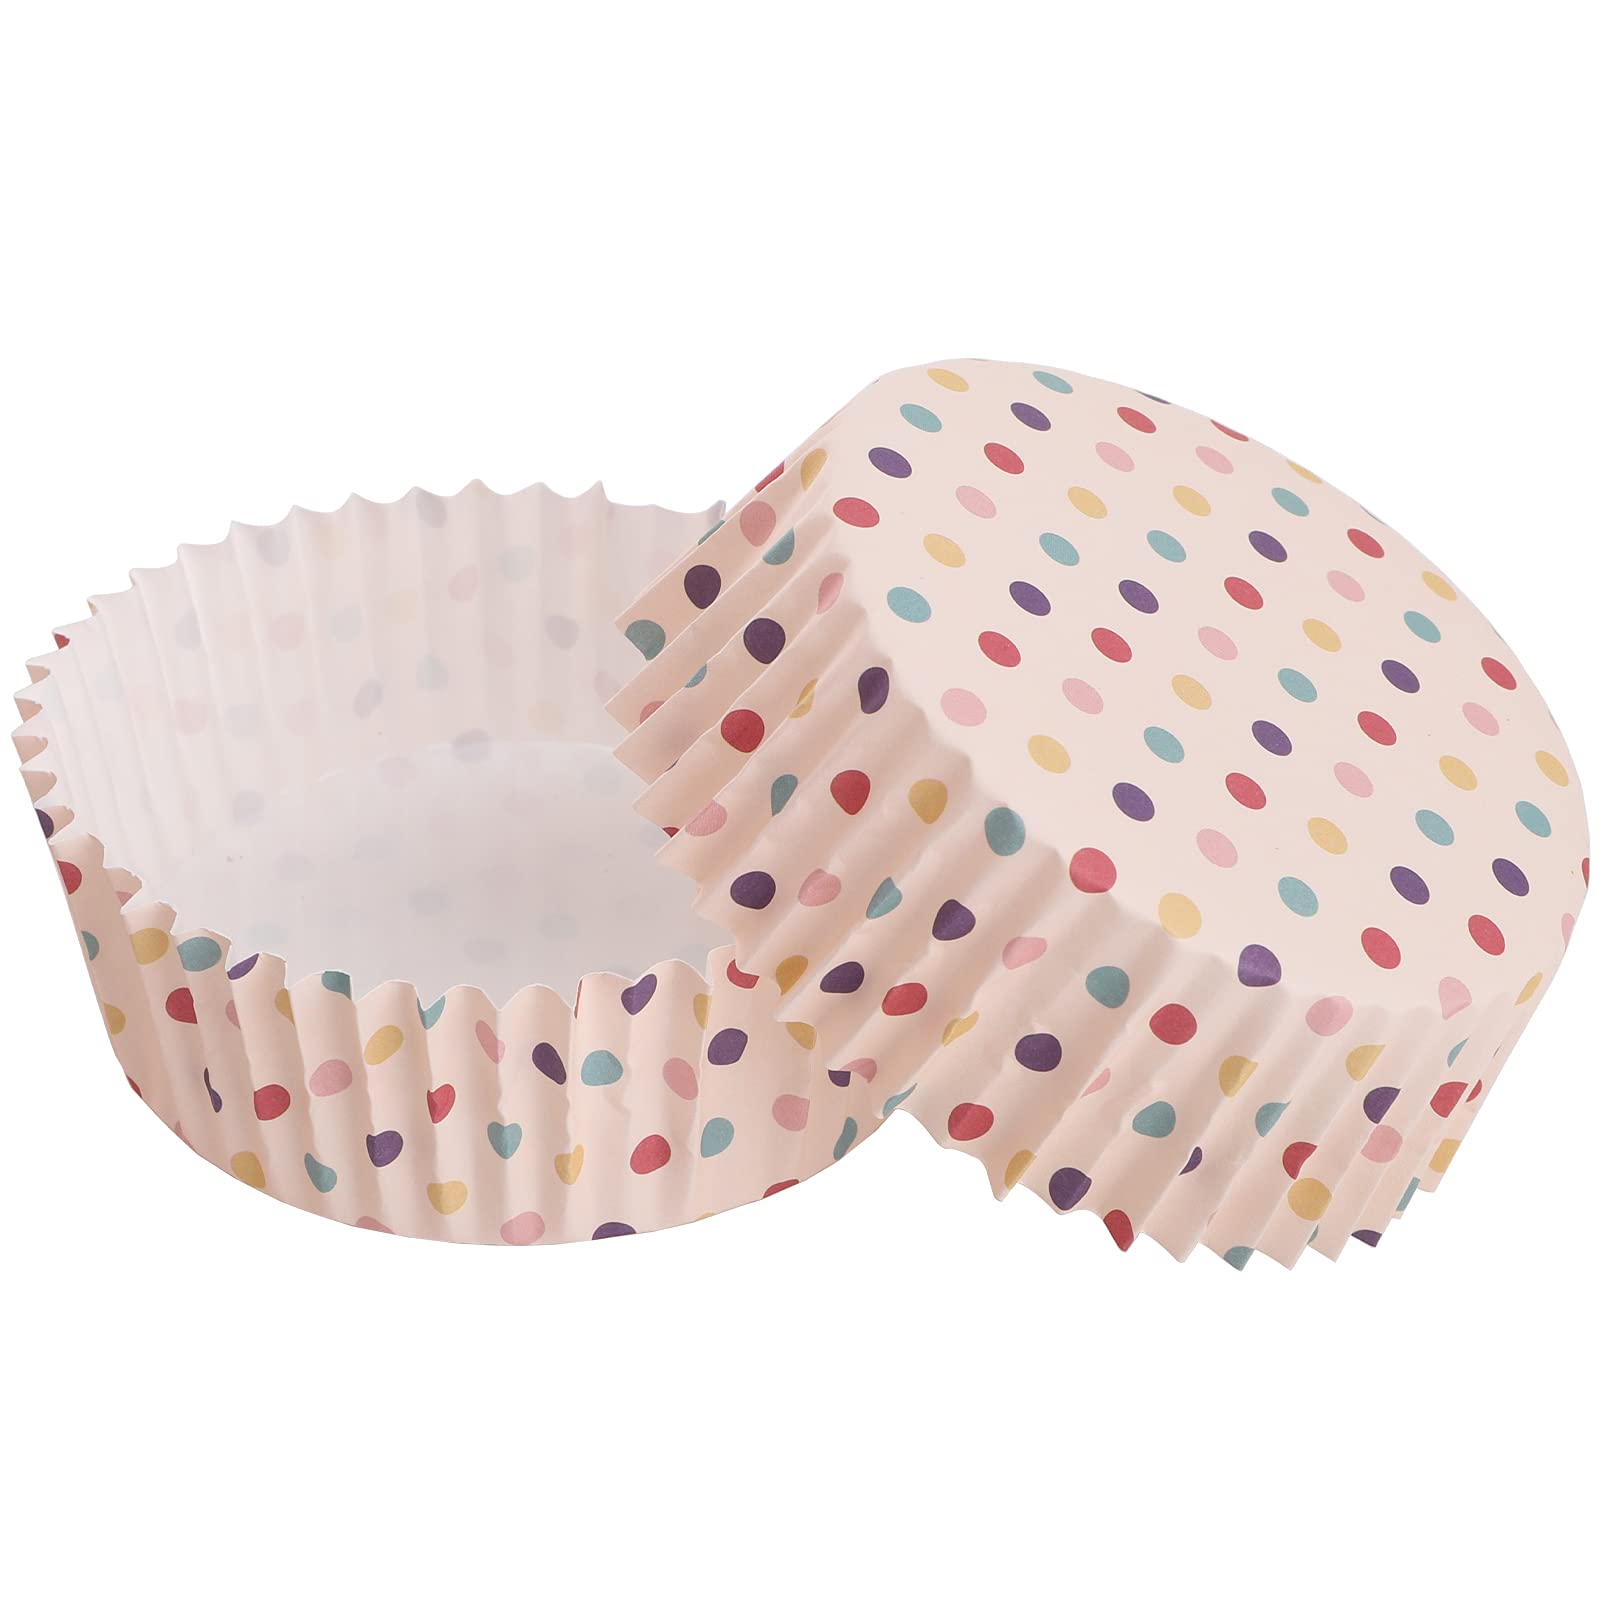 YOUEON 600 Pcs 3.5 In Jumbo Cupcake Liners Greaseproof, 4 Oz Large Paper Baking Cups Non-Stick, Jumbo Muffin Liners for Muffins, Cupcakes, Brownie, Quiche, Mini Snacks, Recyclable, 3 Pattern